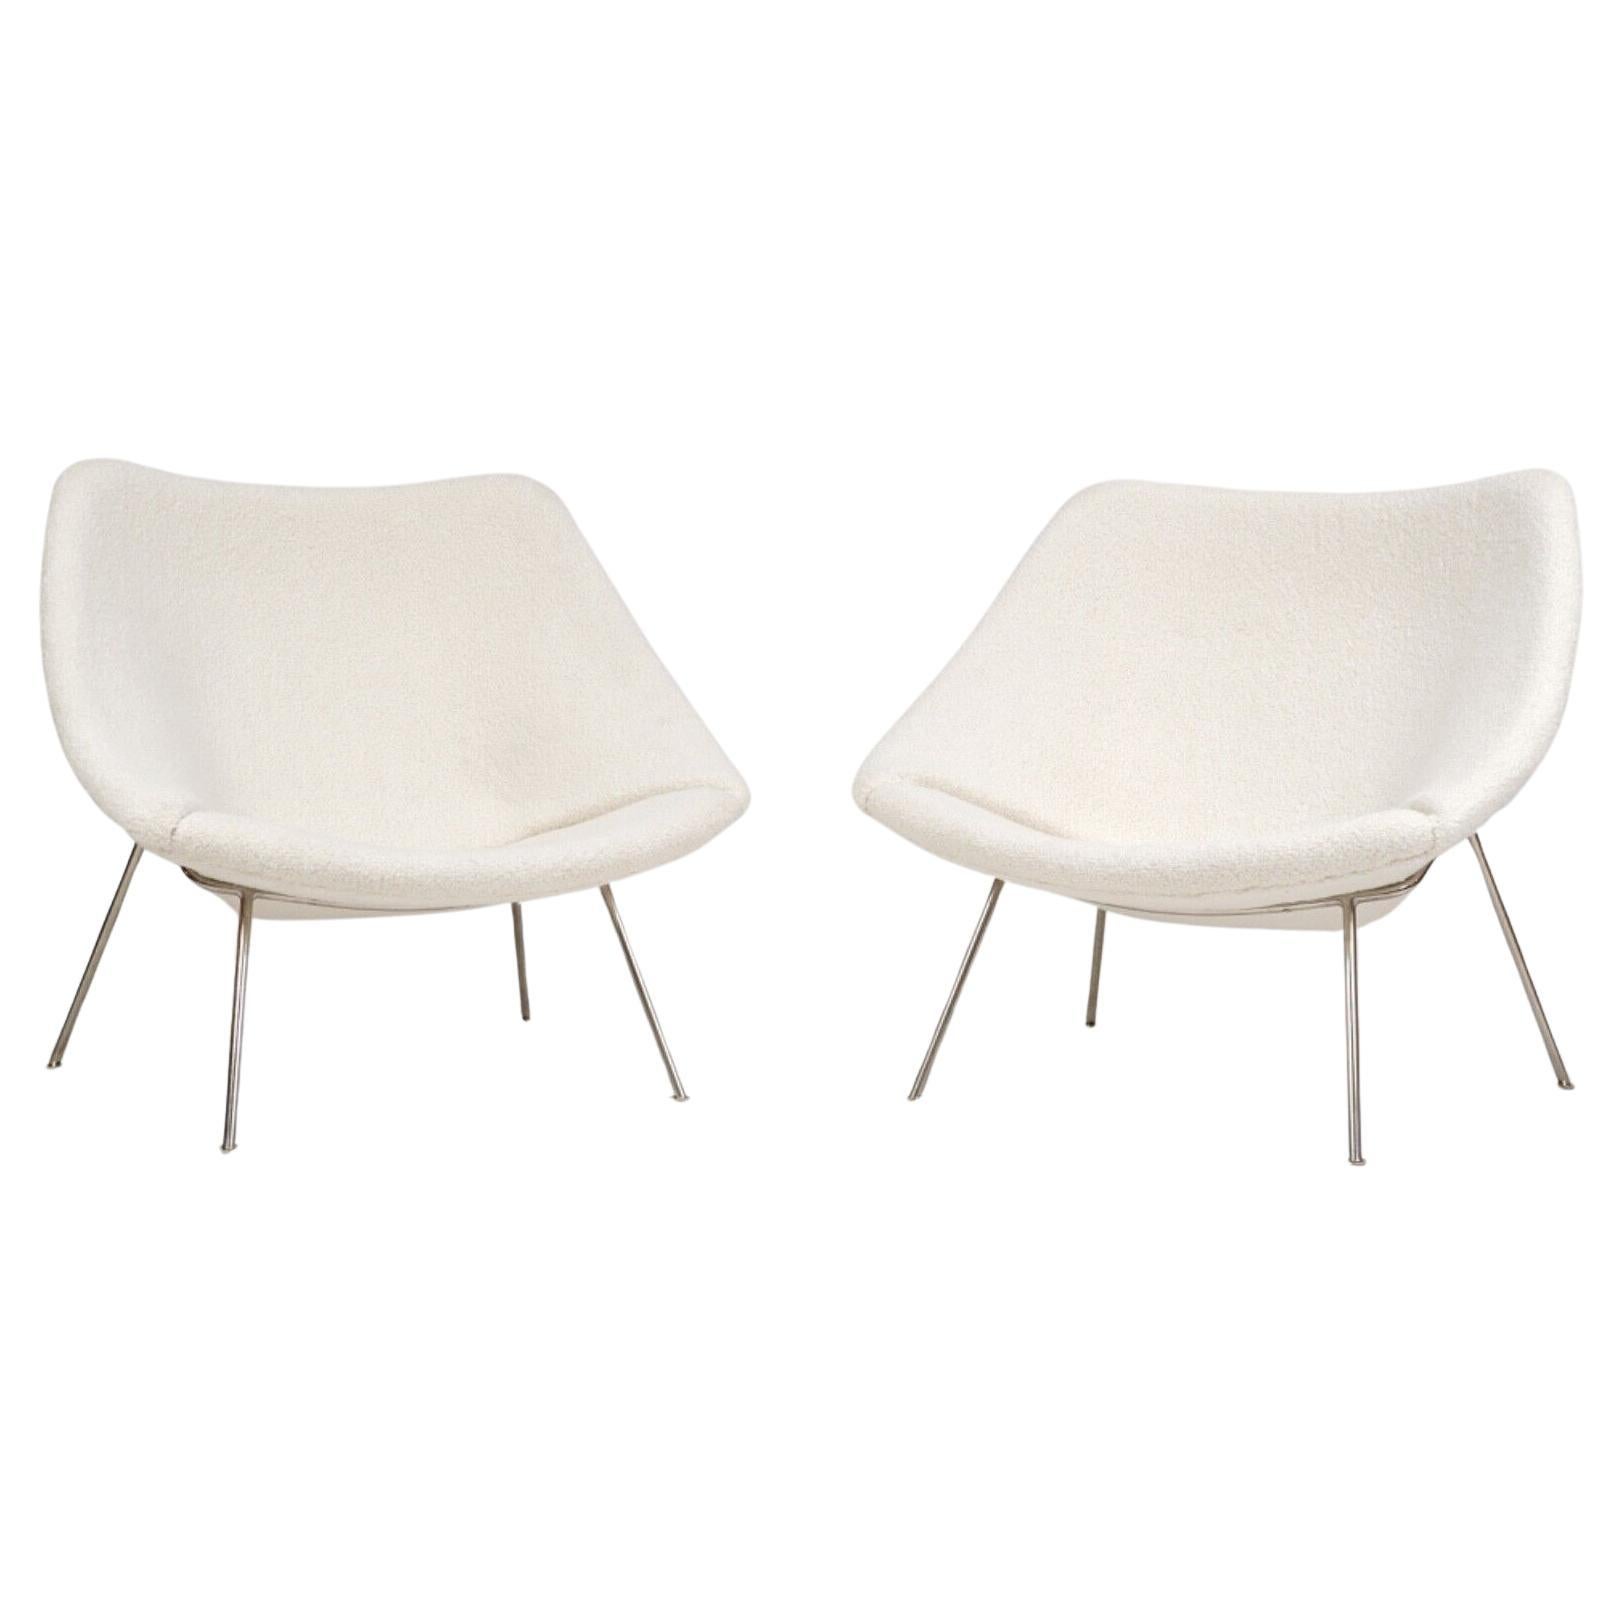 Pair of Pierre Paulin Oyster Chairs For Artifort For Sale